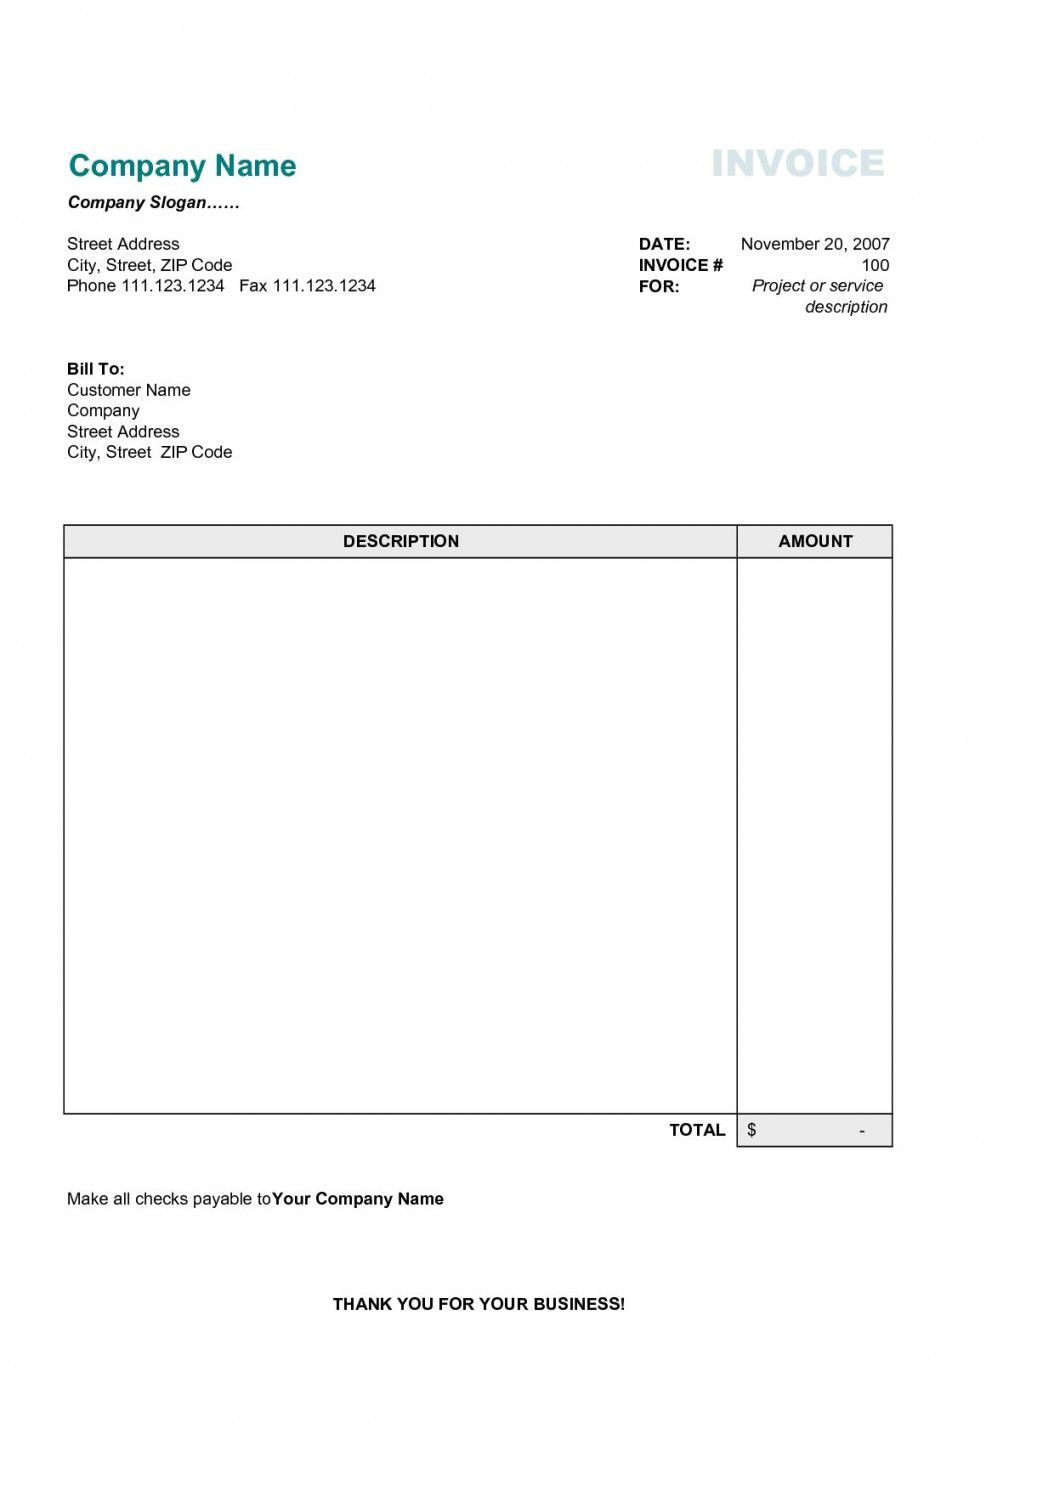 Download Proforma Invoice Template Word | Free Invoice Inside Invoice Template For Openoffice Free